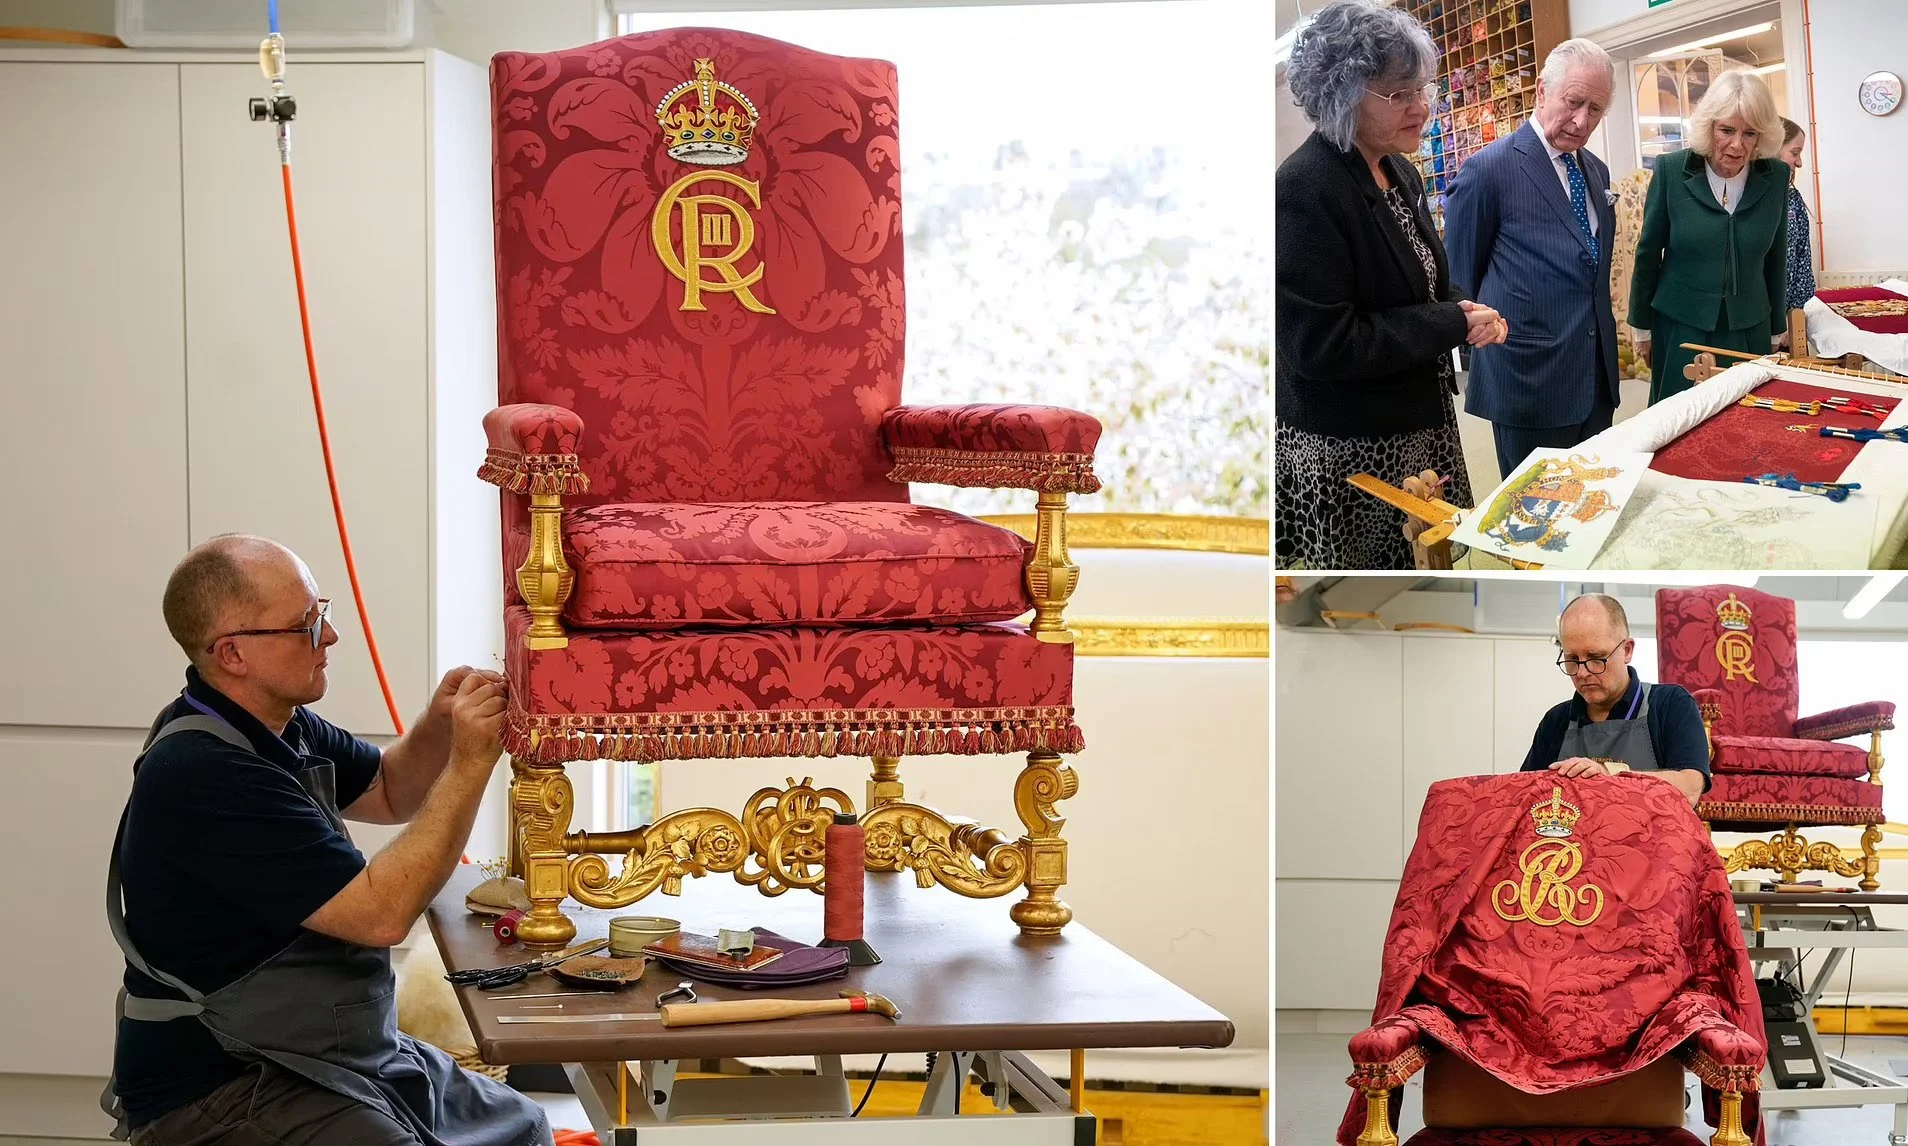 King Charles III To Use Recycled King George VI’s Chair For His Coronation